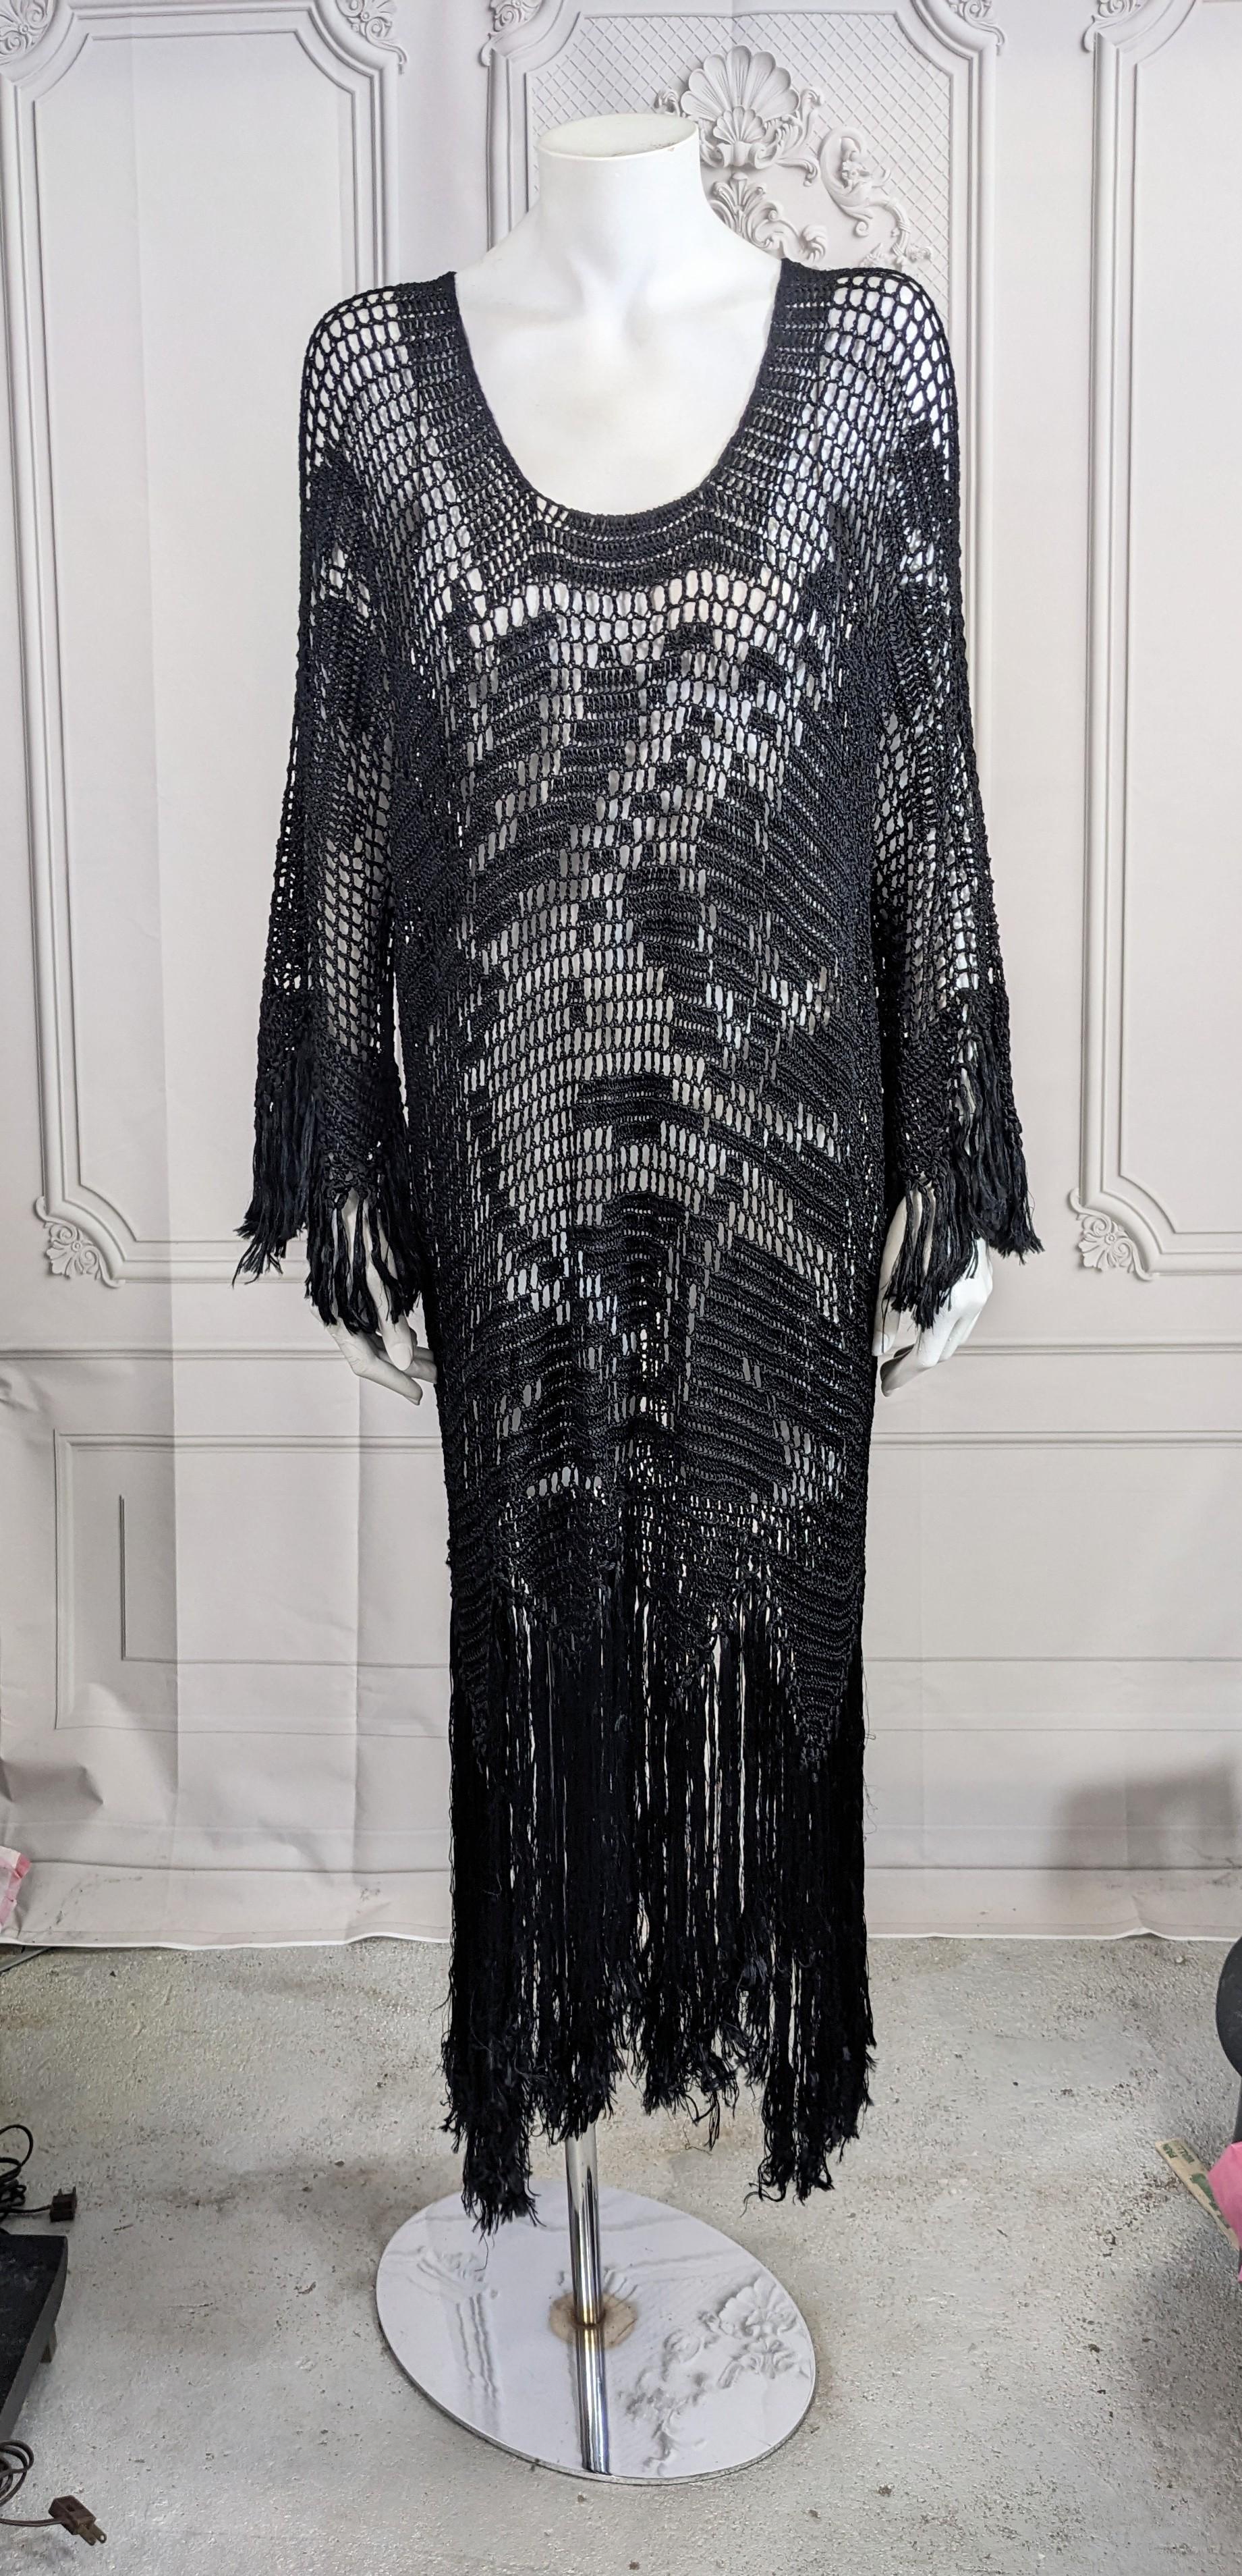 Amazing Art Deco Hand Crochet Fringed Dress with Bohemian vibes. Had made circa 1920's in black as an overdress abstract openwork floral pattern and fringed trim. Hand made. 1920's. Rayon.